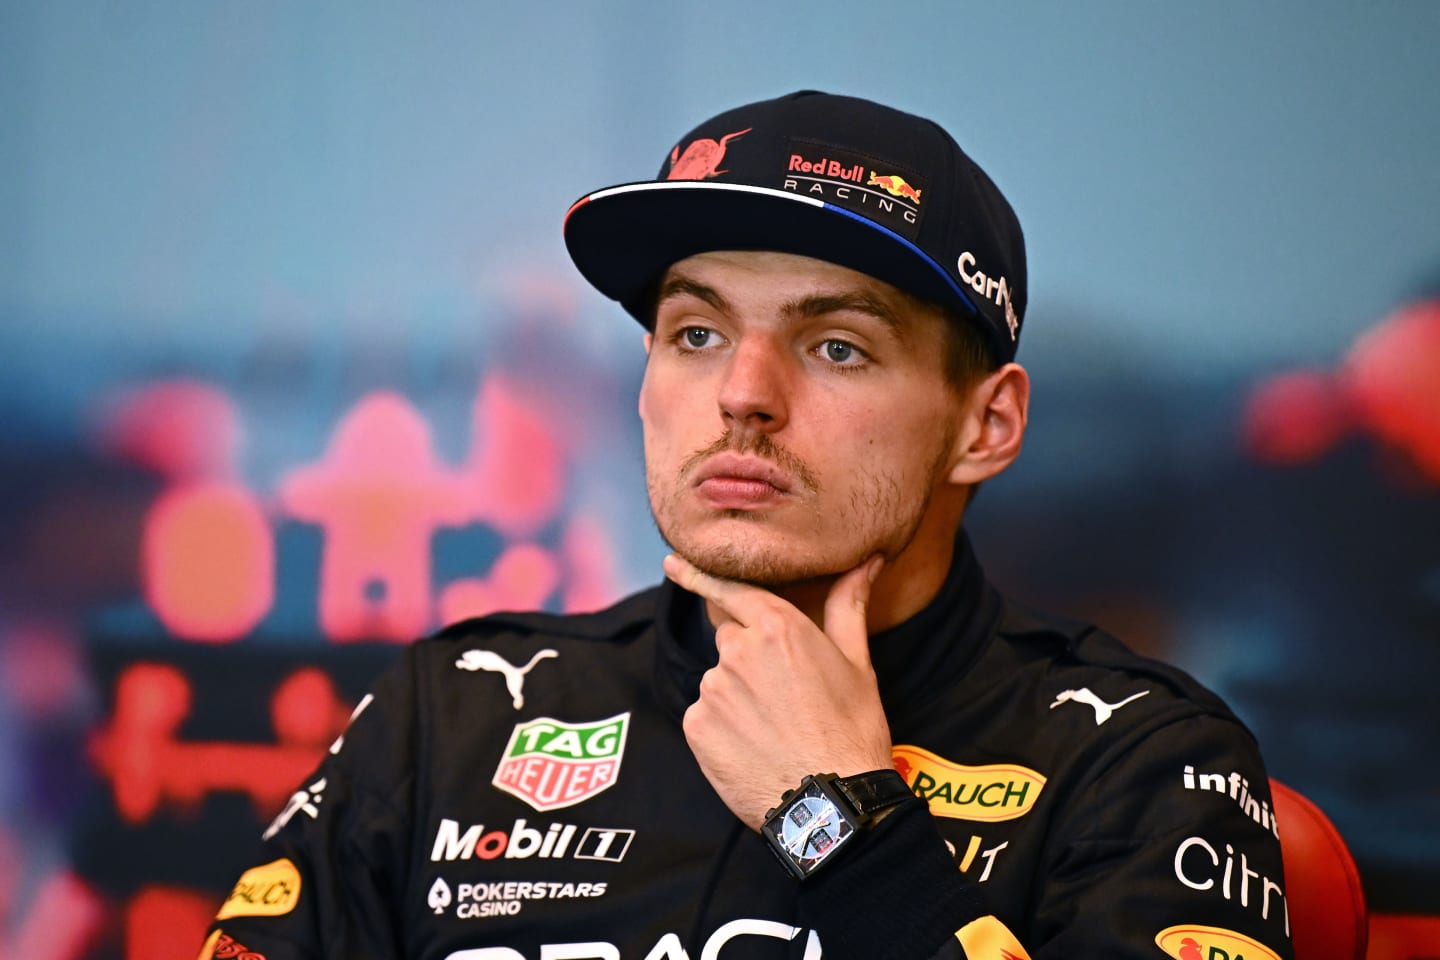 MONTE-CARLO, MONACO - MAY 29: Third placed Max Verstappen of the Netherlands and Oracle Red Bull Racing looks on in the press conference after the F1 Grand Prix of Monaco at Circuit de Monaco on May 29, 2022 in Monte-Carlo, Monaco. (Photo by Clive Mason/Getty Images)